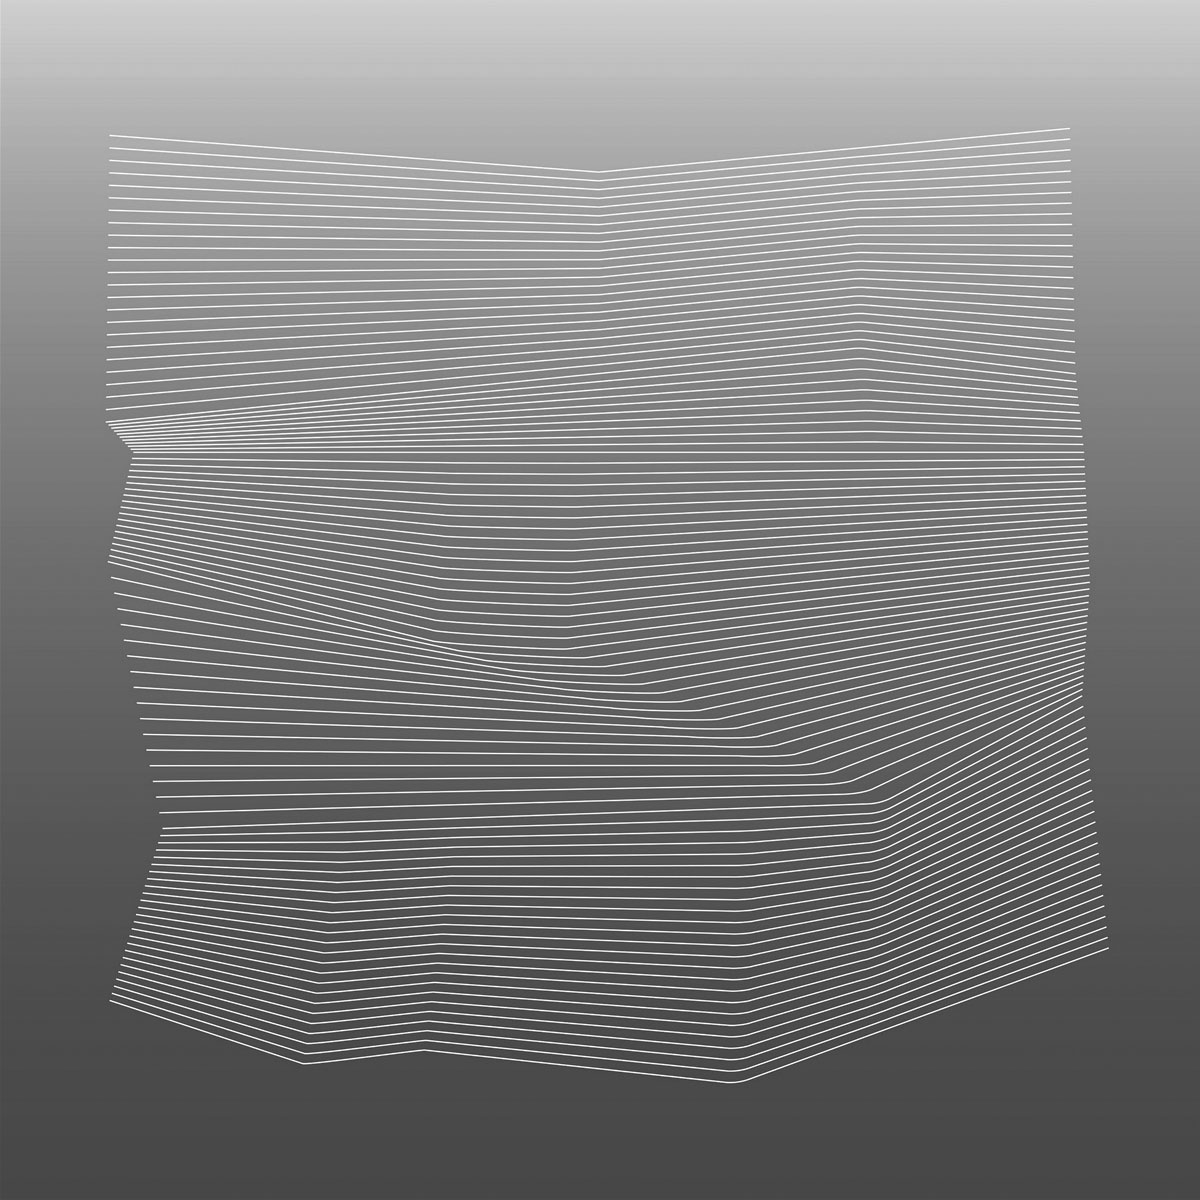 Atop a background gradient moving downward from light to dark, a dense field of horizontal white lines whose various contortions subtly suggest folds in a piece of paper